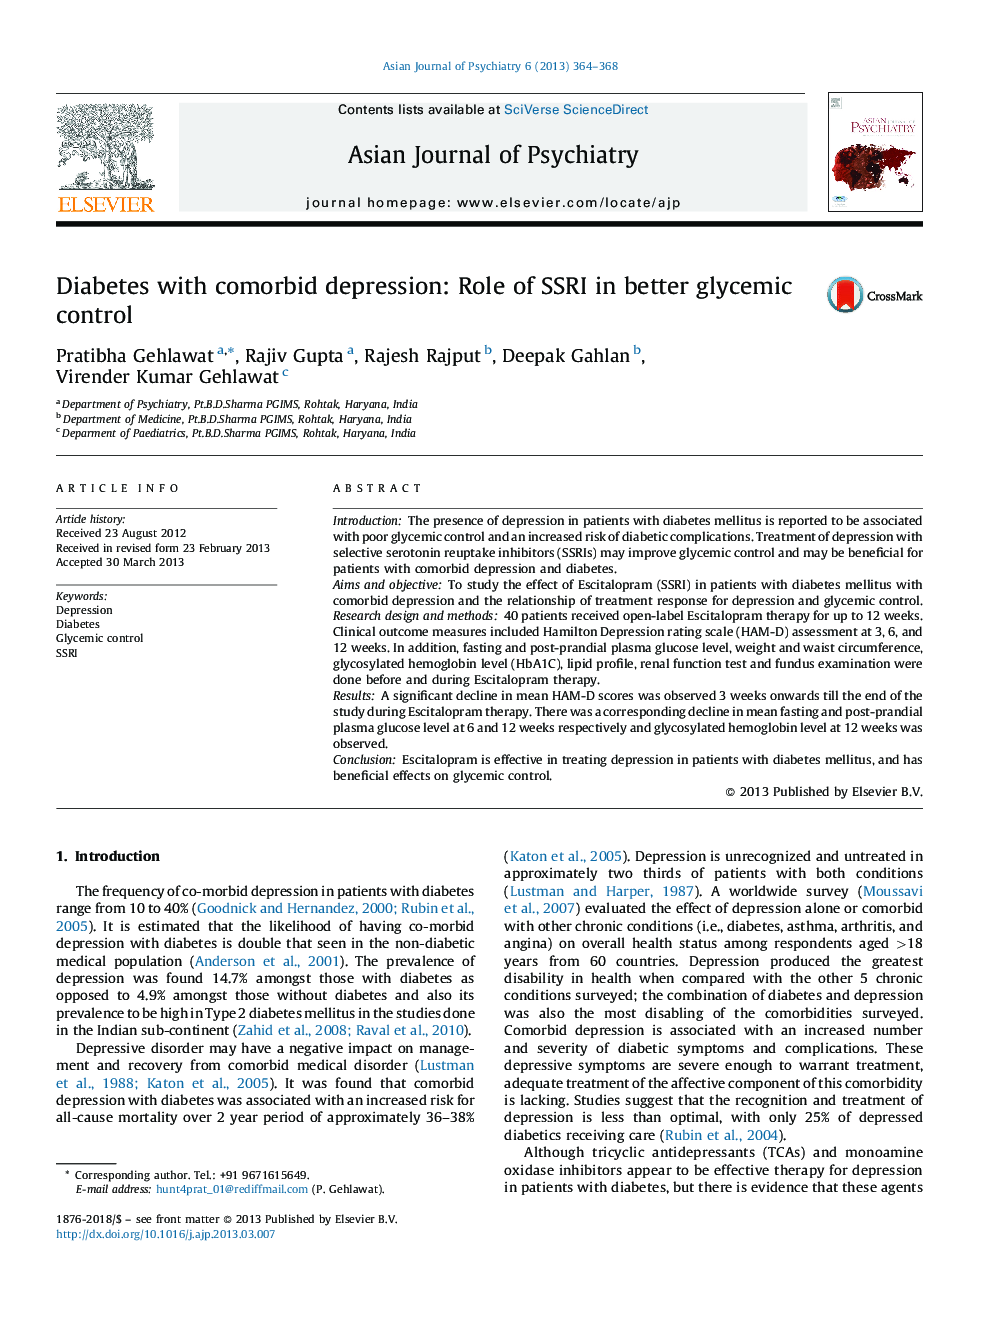 Diabetes with comorbid depression: Role of SSRI in better glycemic control